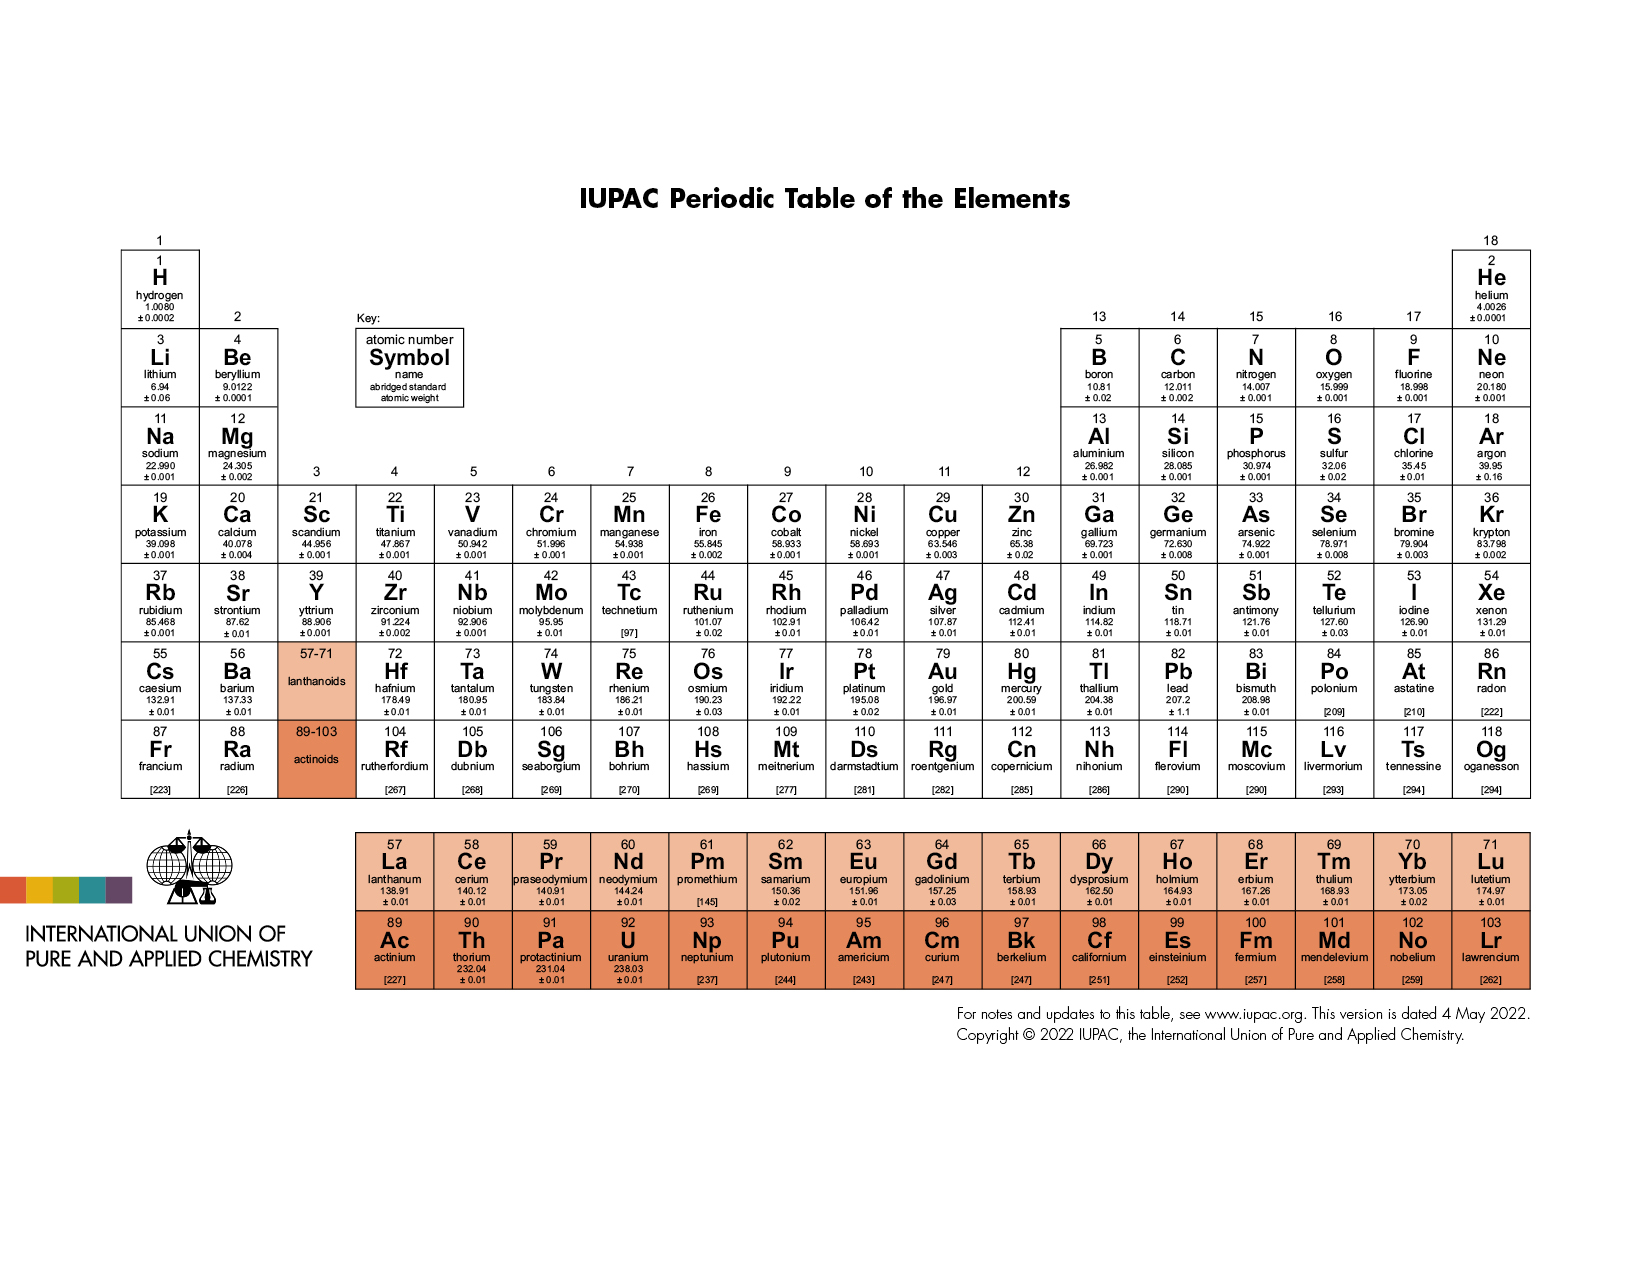 Periodic Table this is NOT life size.